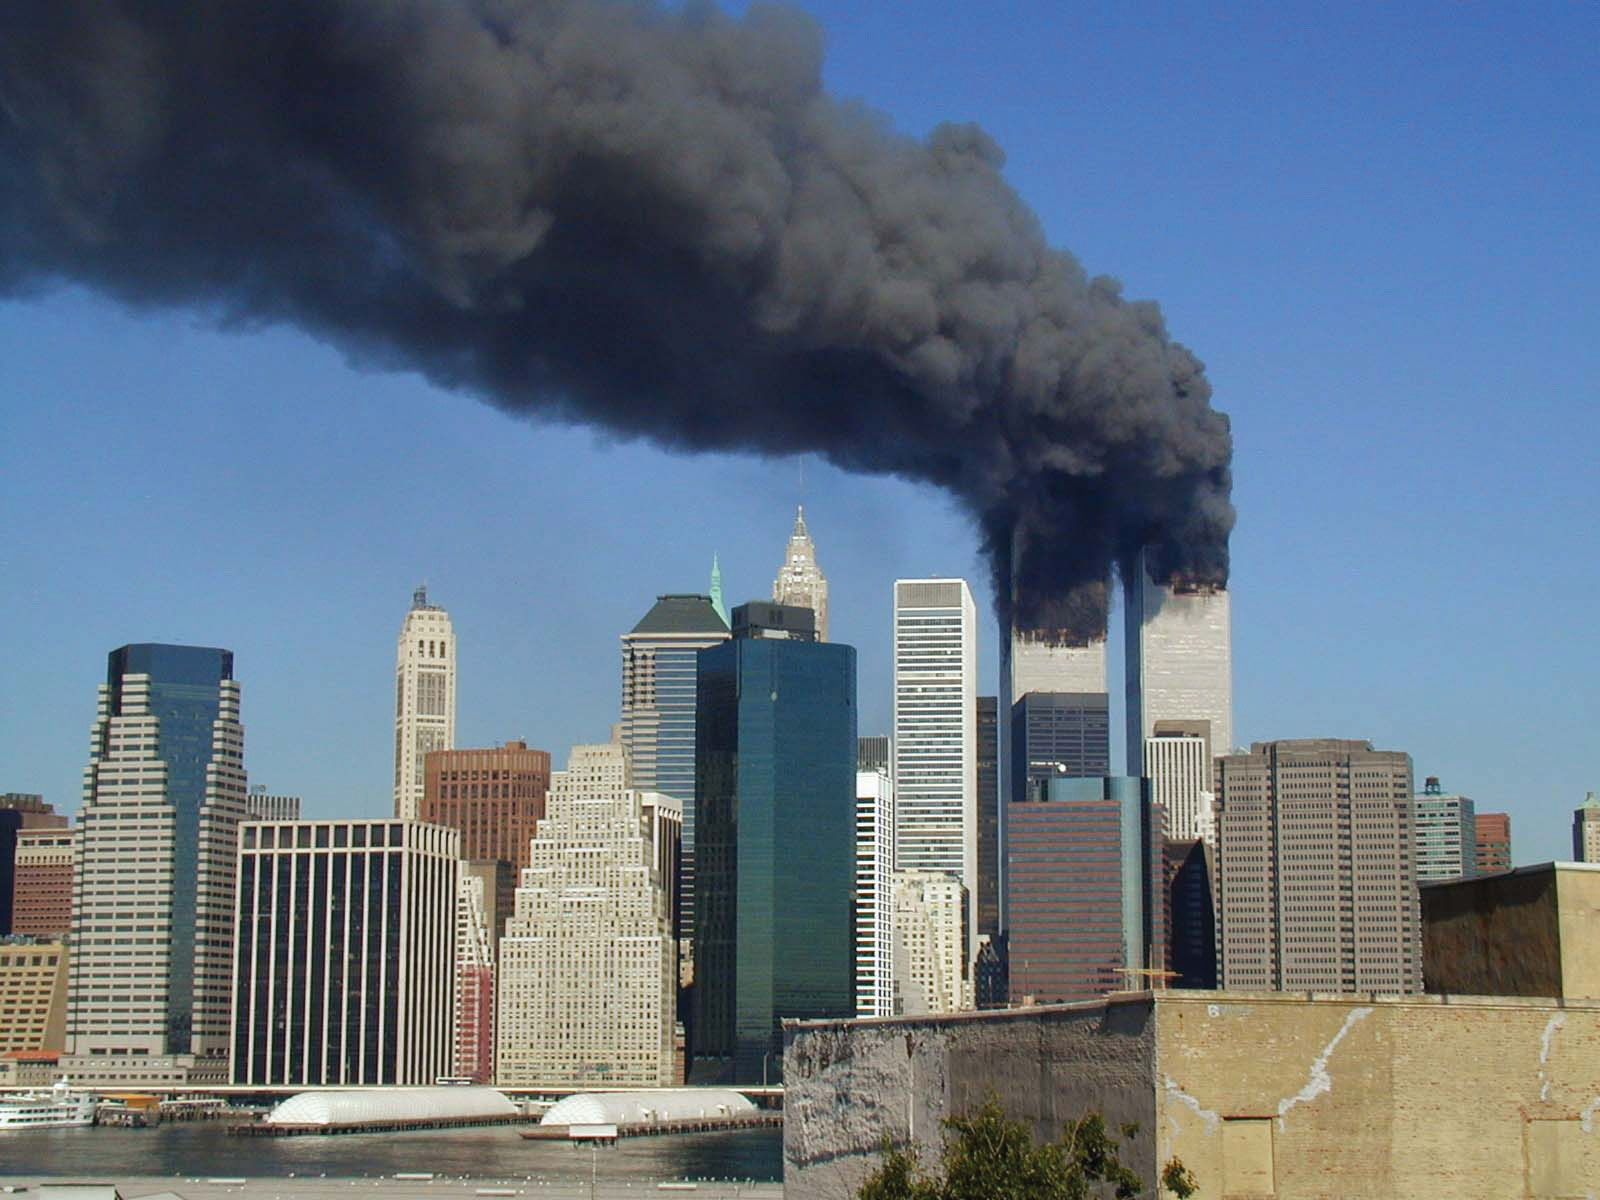 The twin towers still smoking, before they crumbled